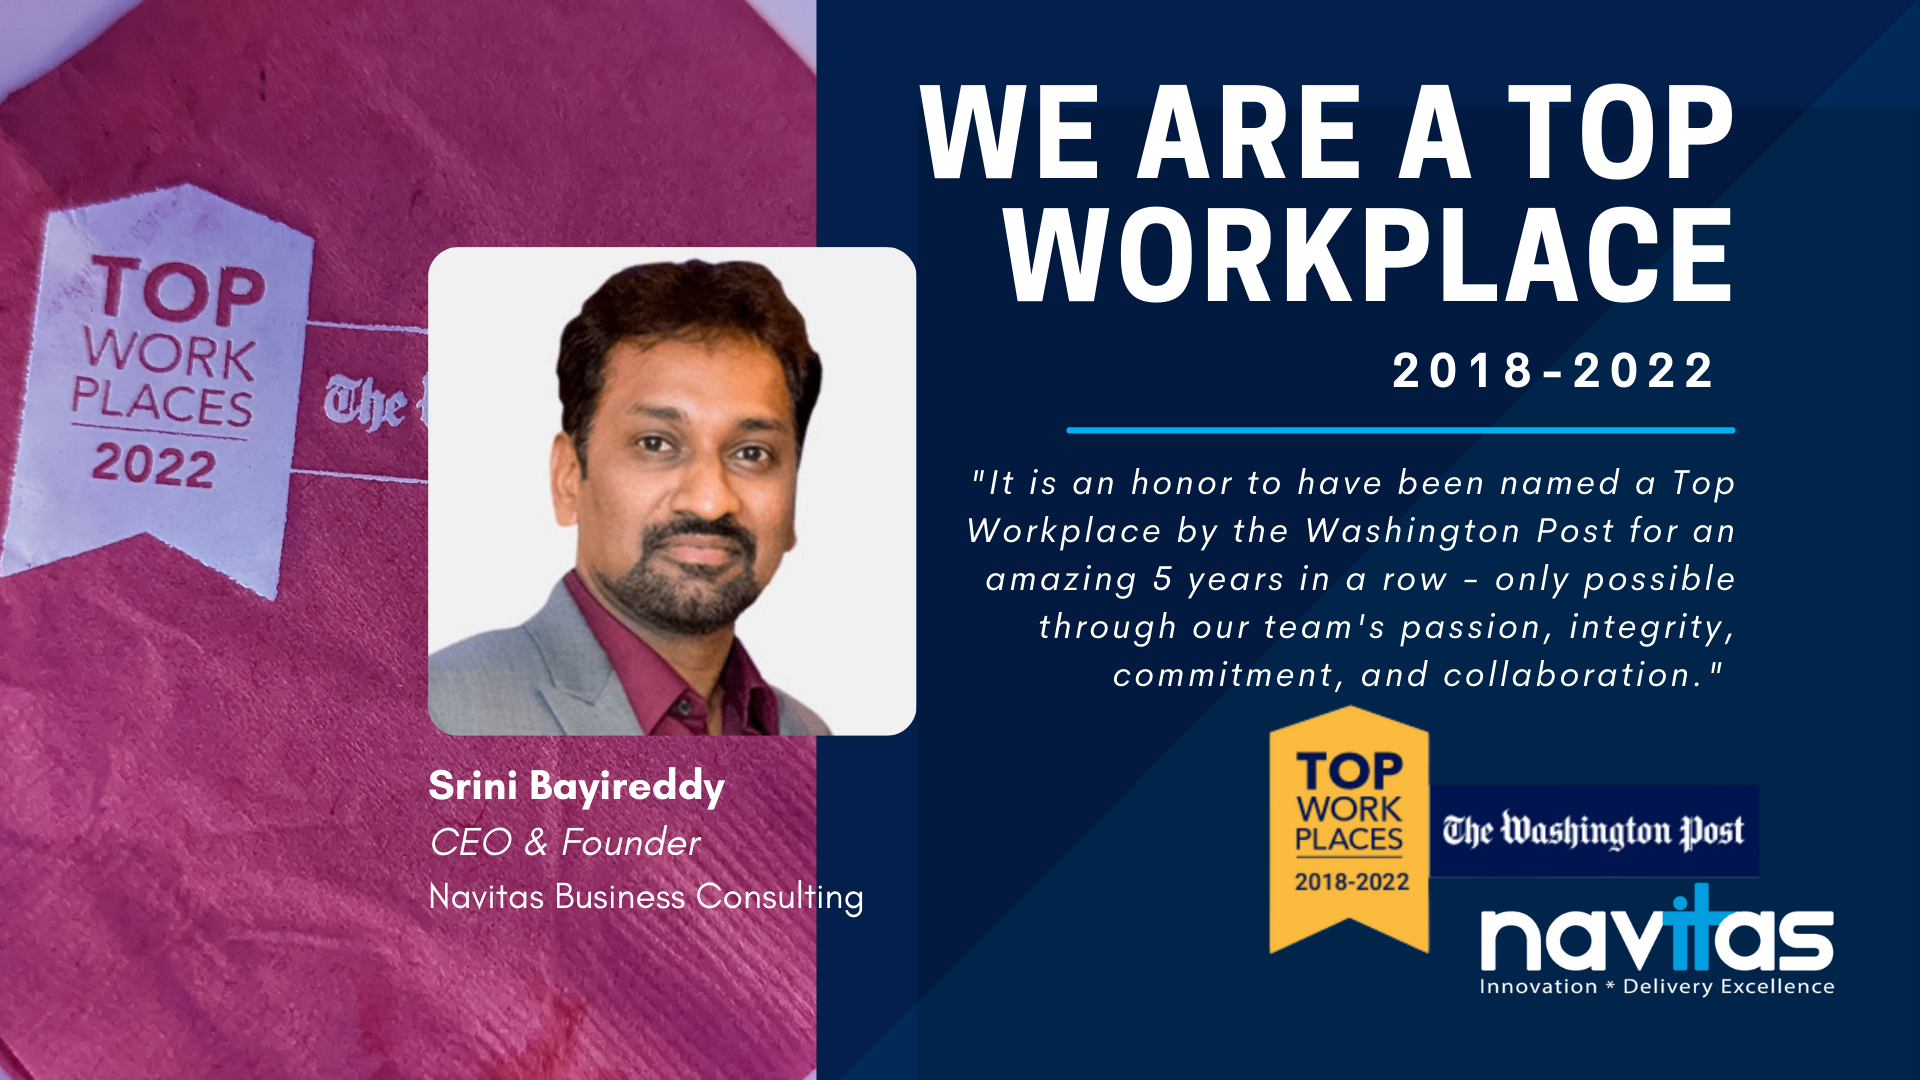 Navitas is Proud to be Named a Washington Post Top Workplace 5 Years in a Row!